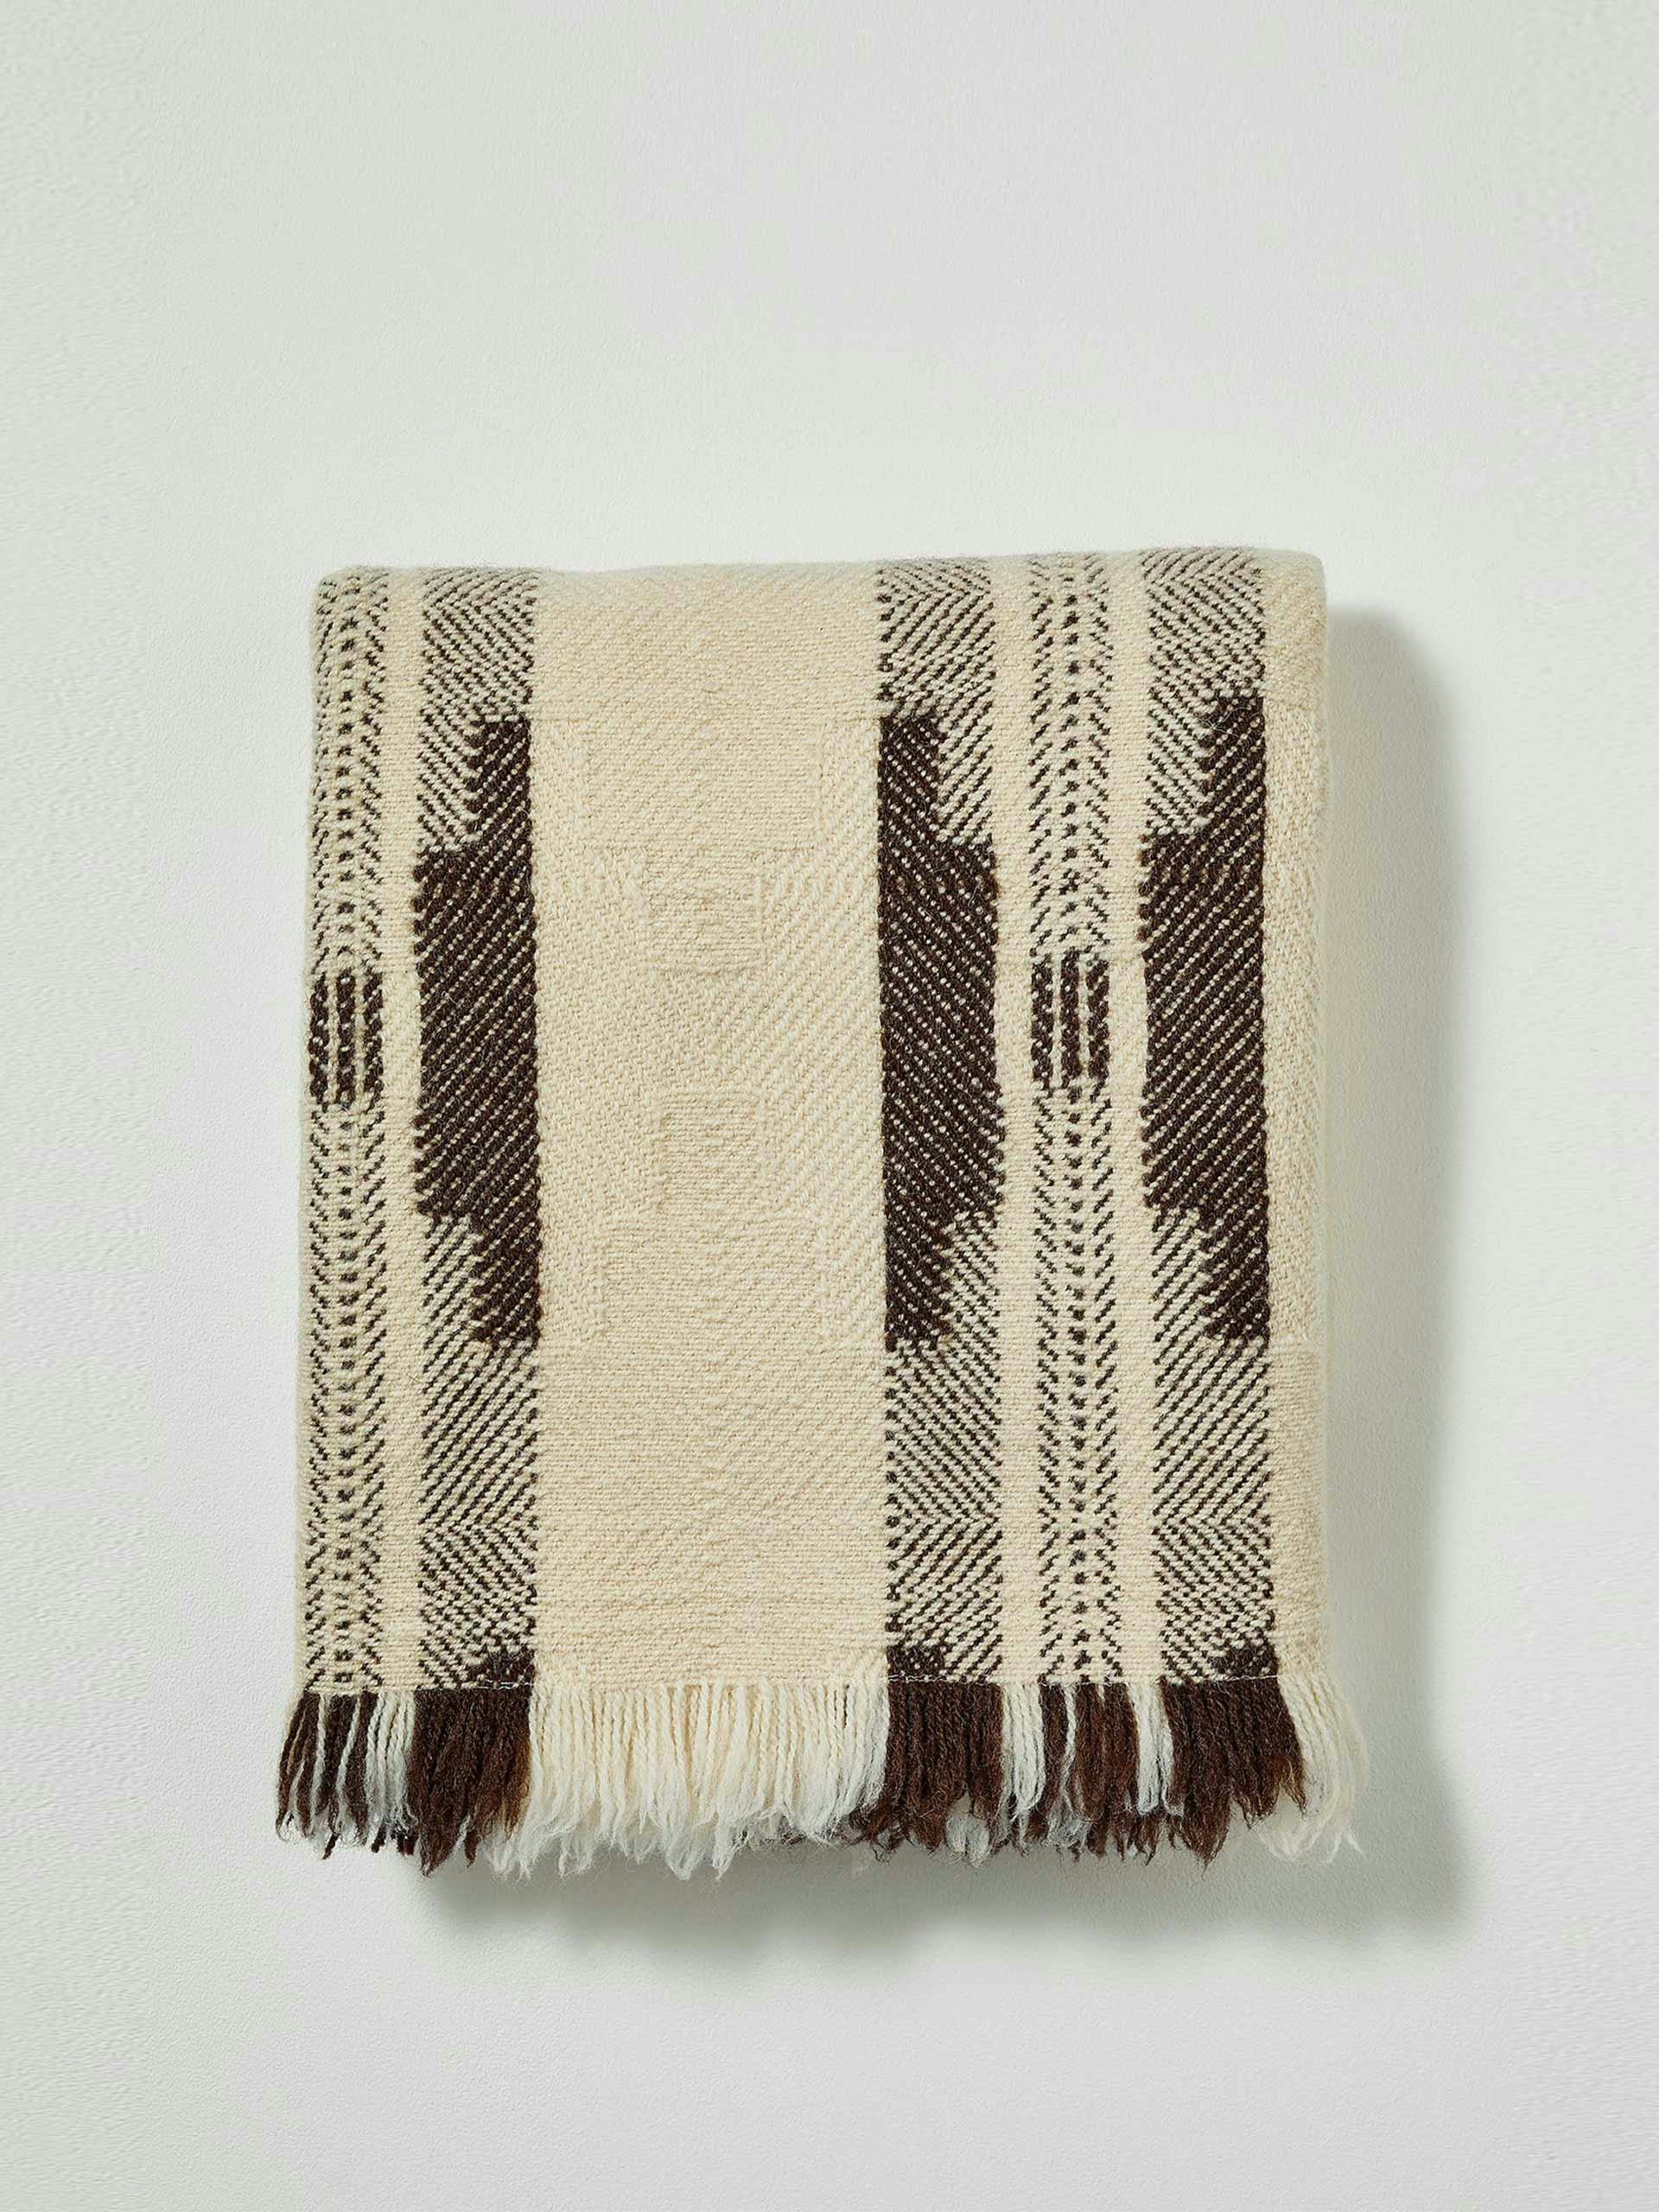 Brown and cream blanket